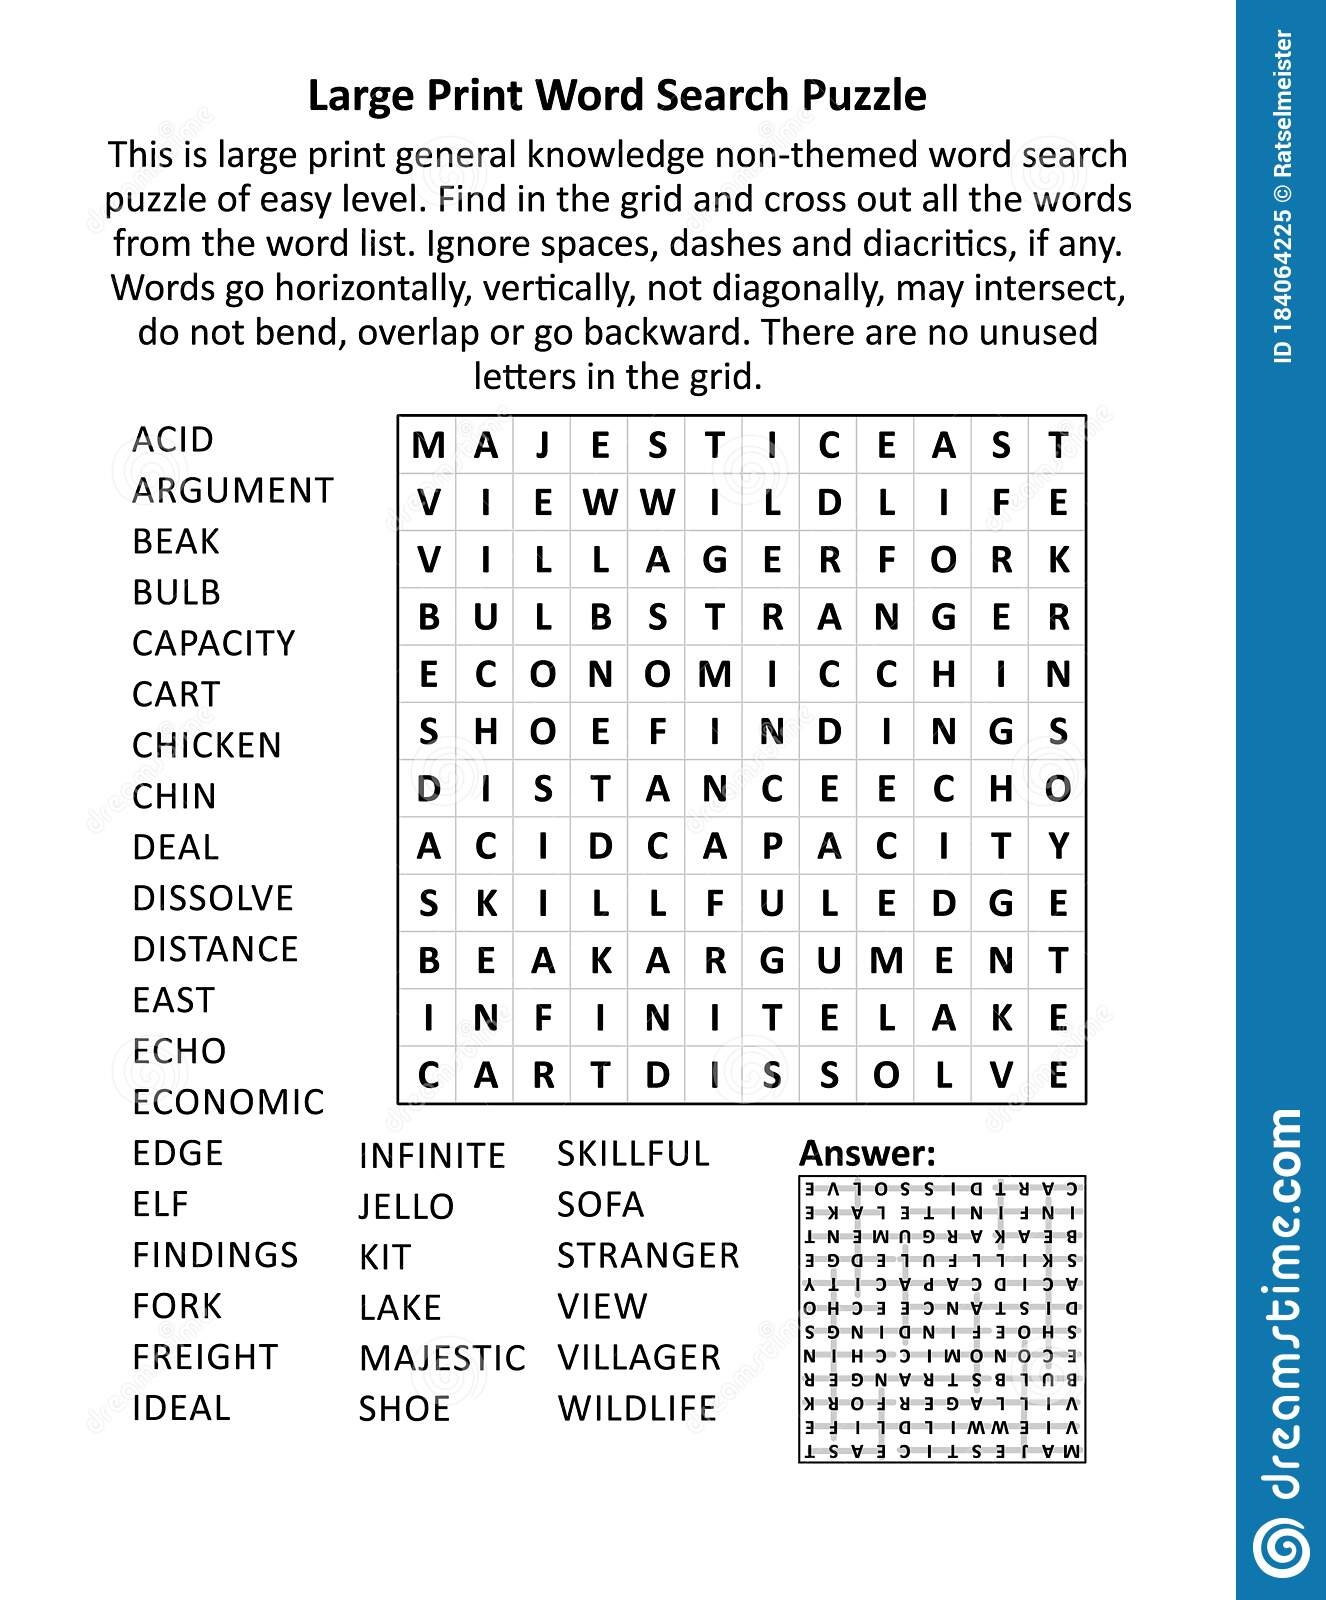 Large Print Word Search Puzzle